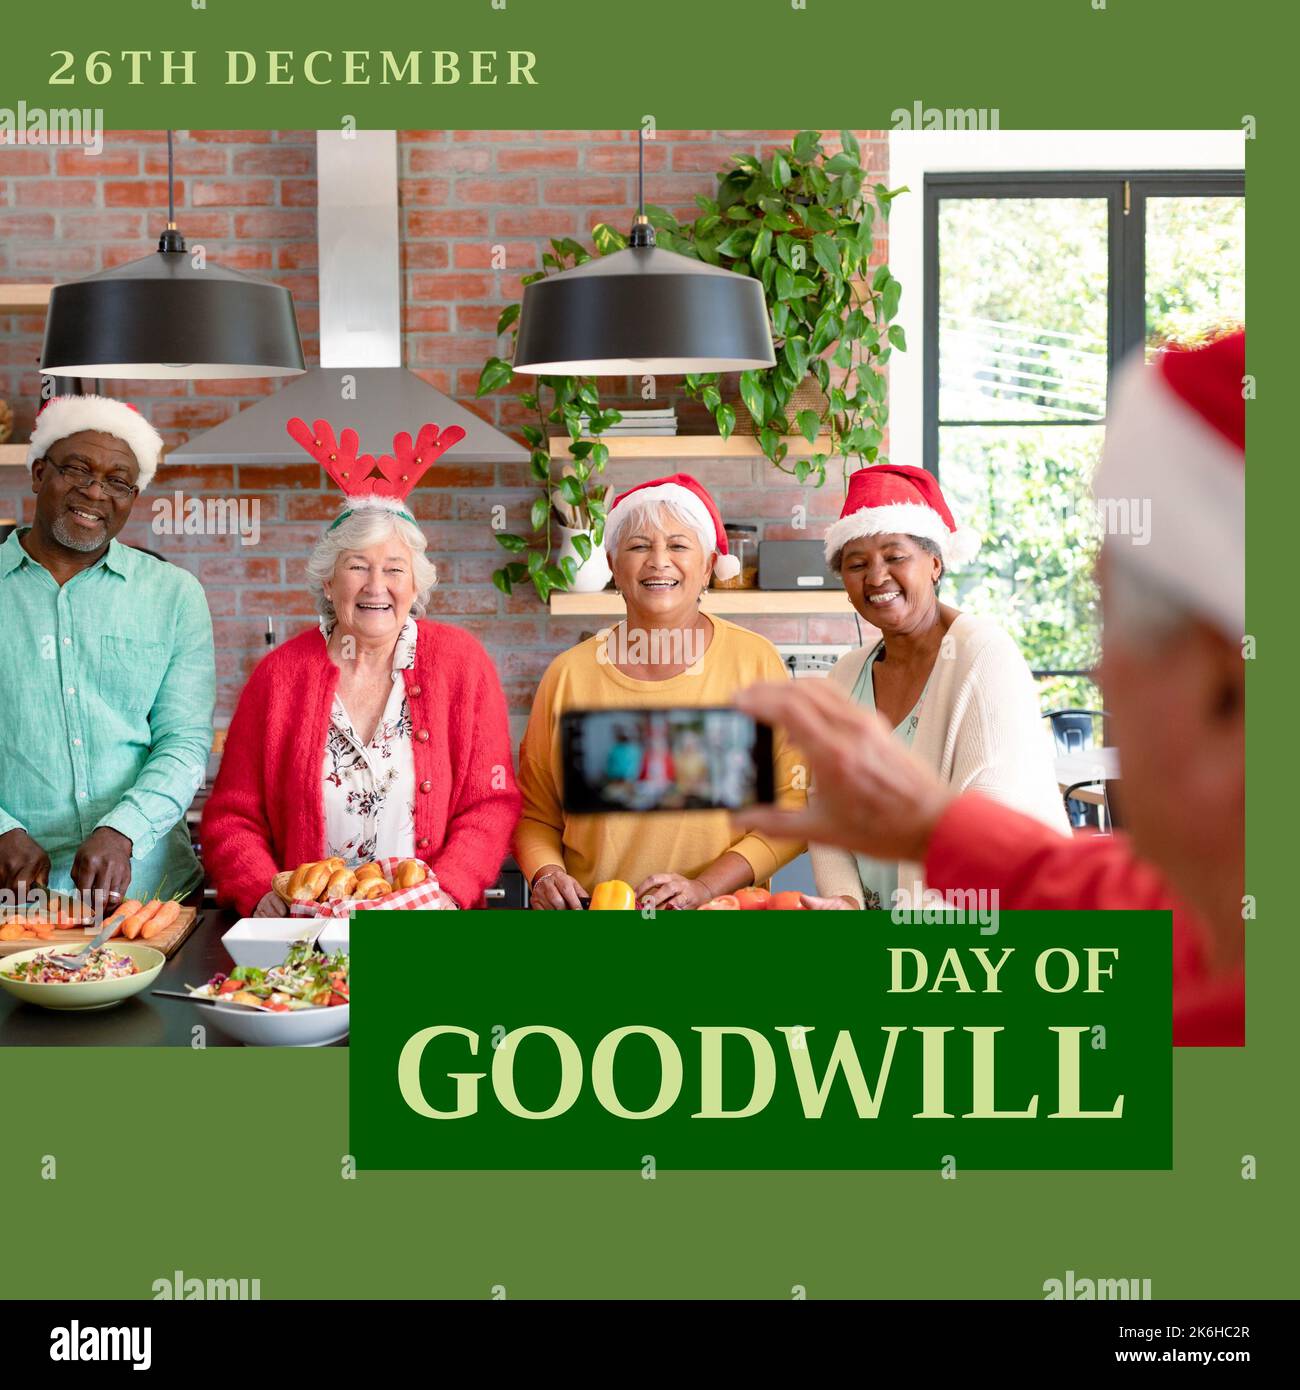 Square image of diverse group of people wearing santa claus hats an day of goodwill text Stock Photo